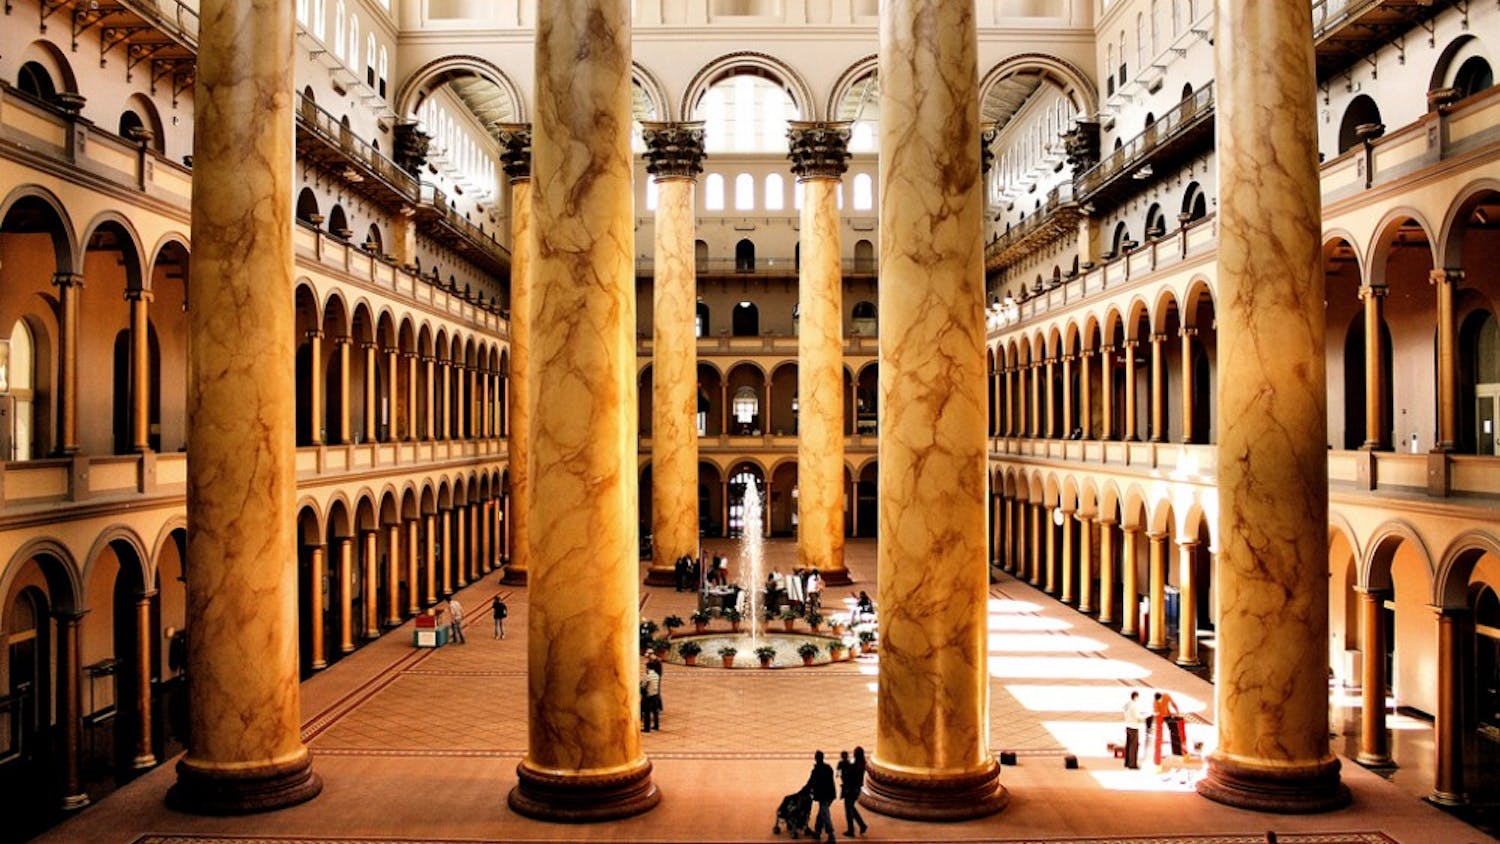 The National Building Museum in D.C.